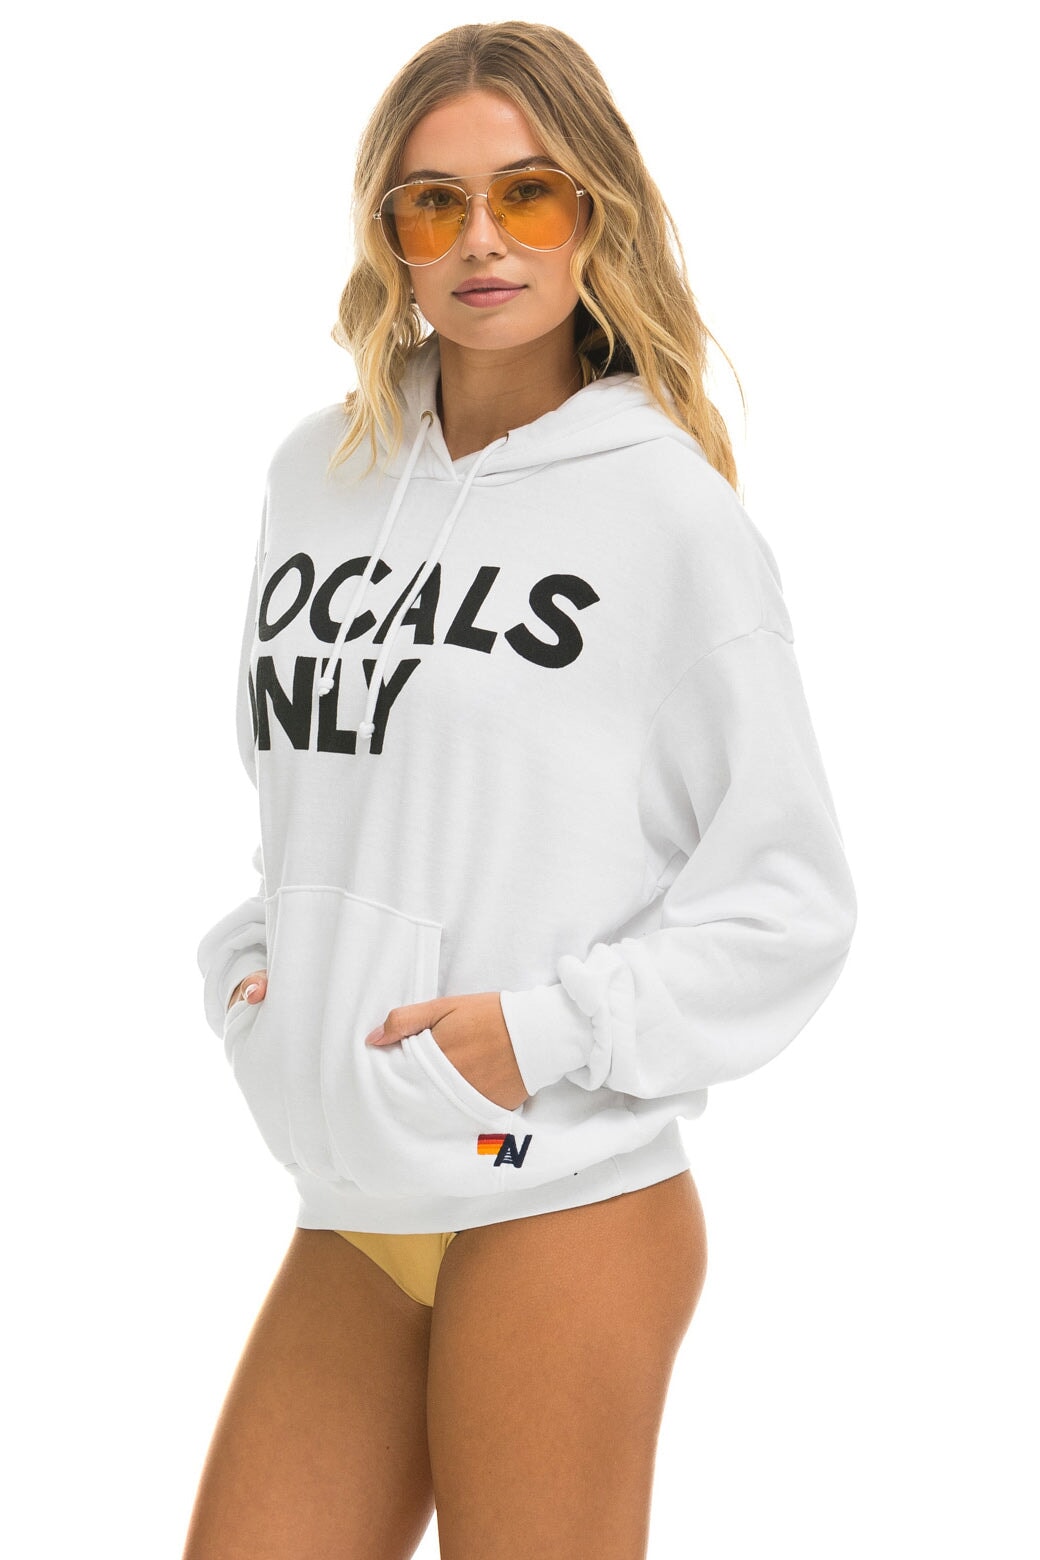 LOCALS ONLY RELAXED PULLOVER HOODIE - WHITE Hoodie Aviator Nation 